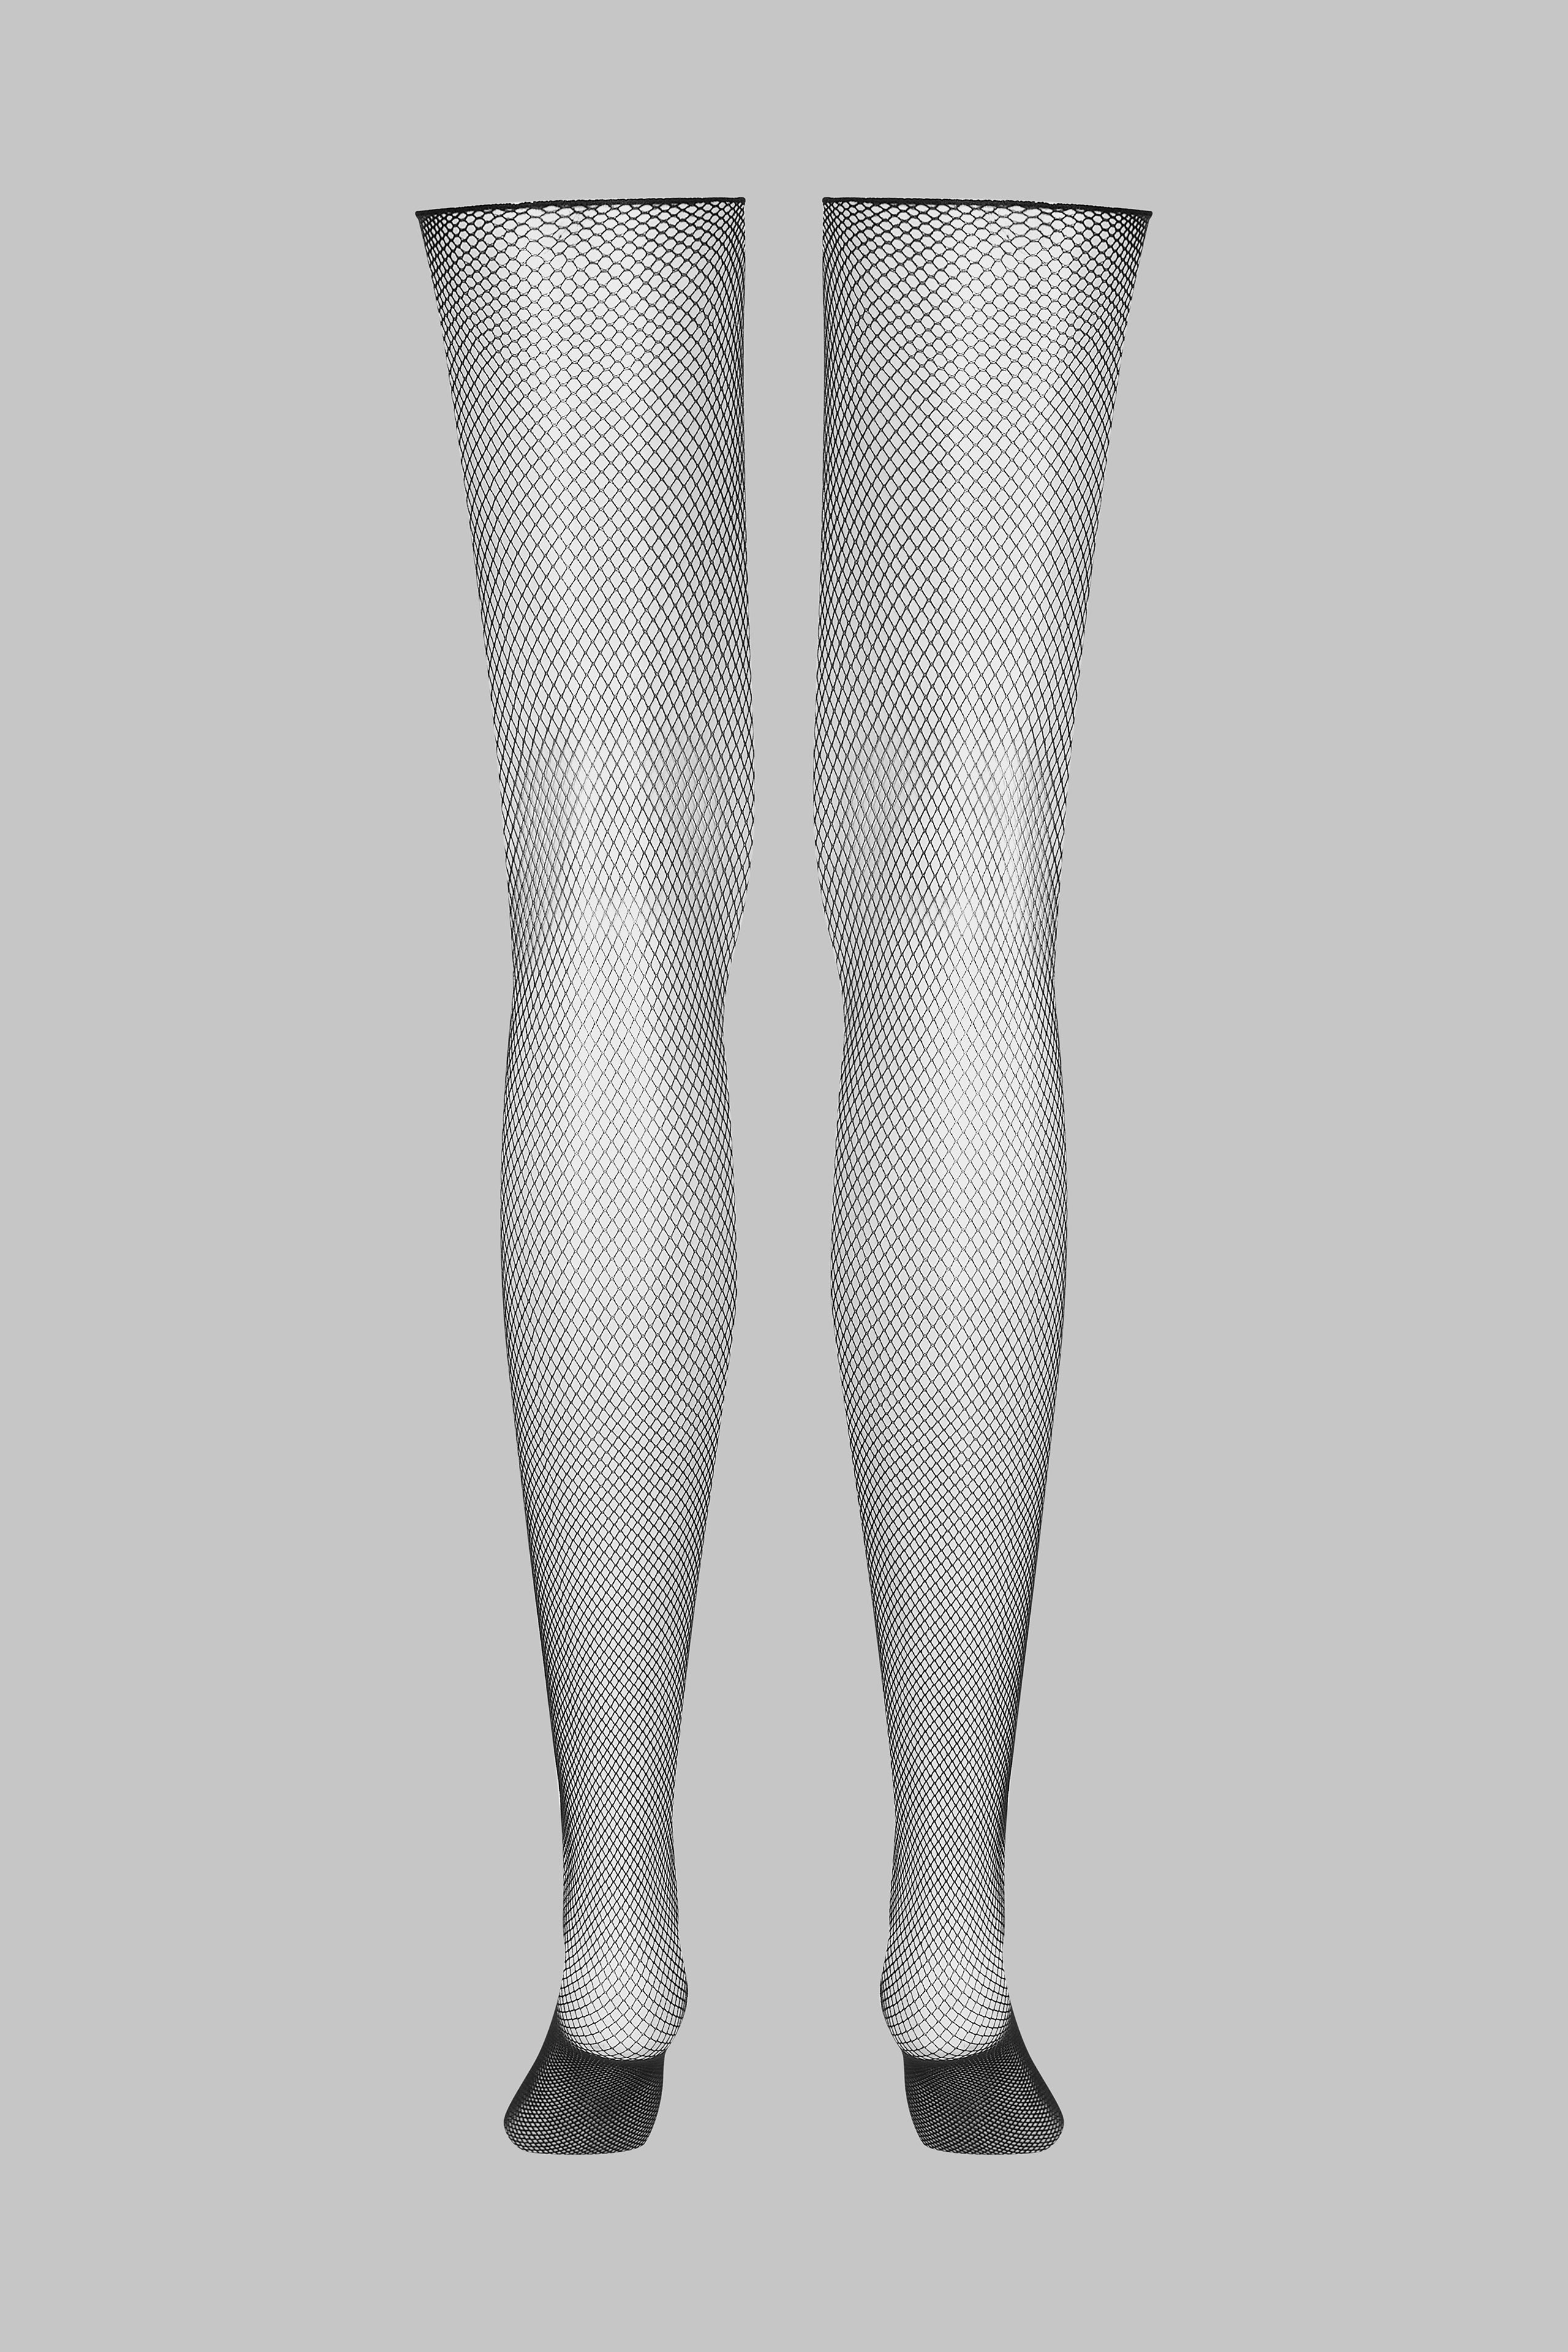 Fishnet cut and curled stockings – Maison Close